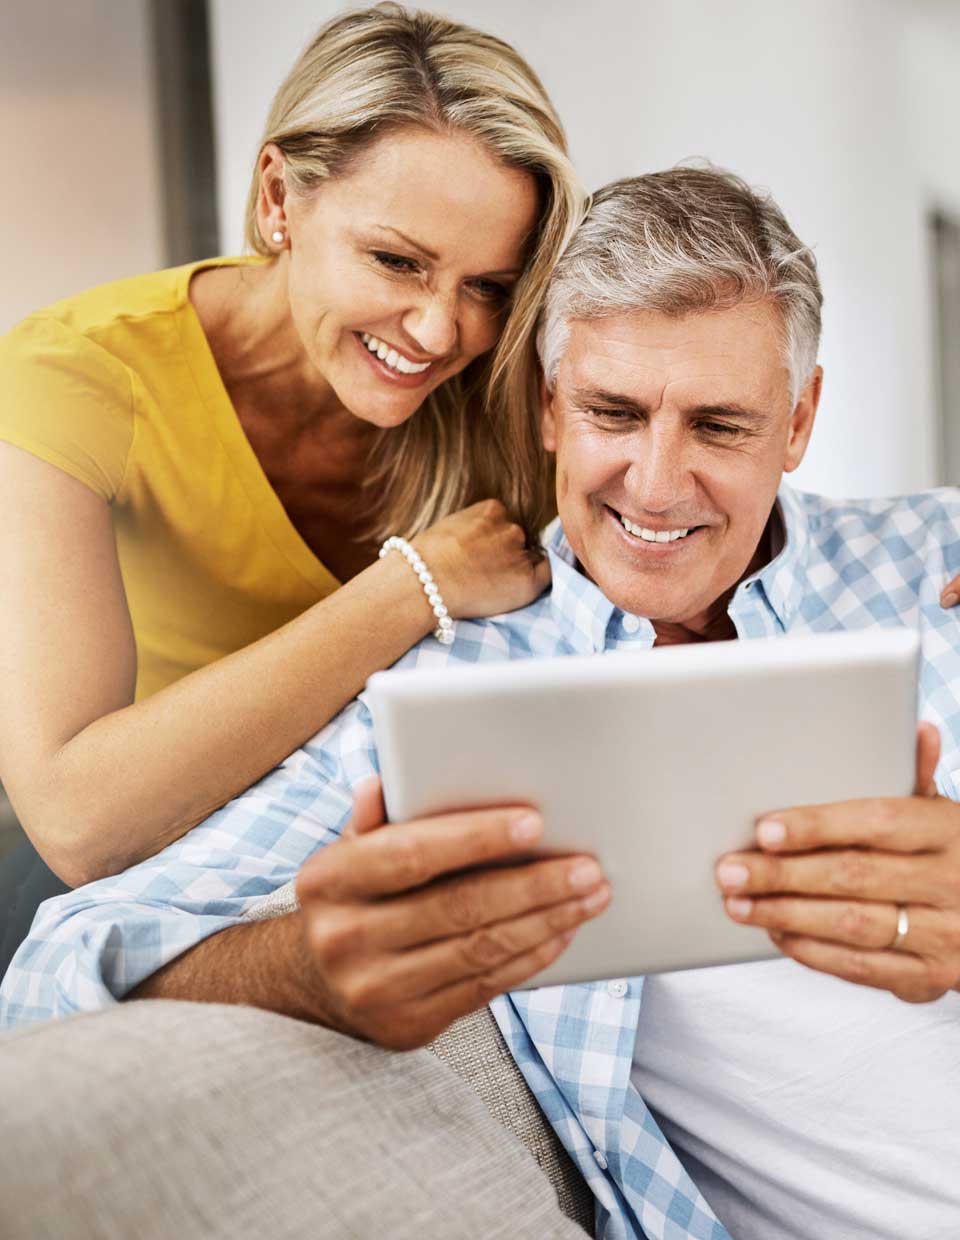 promo image for couple reviewing digital investment portfolio performance on ipad